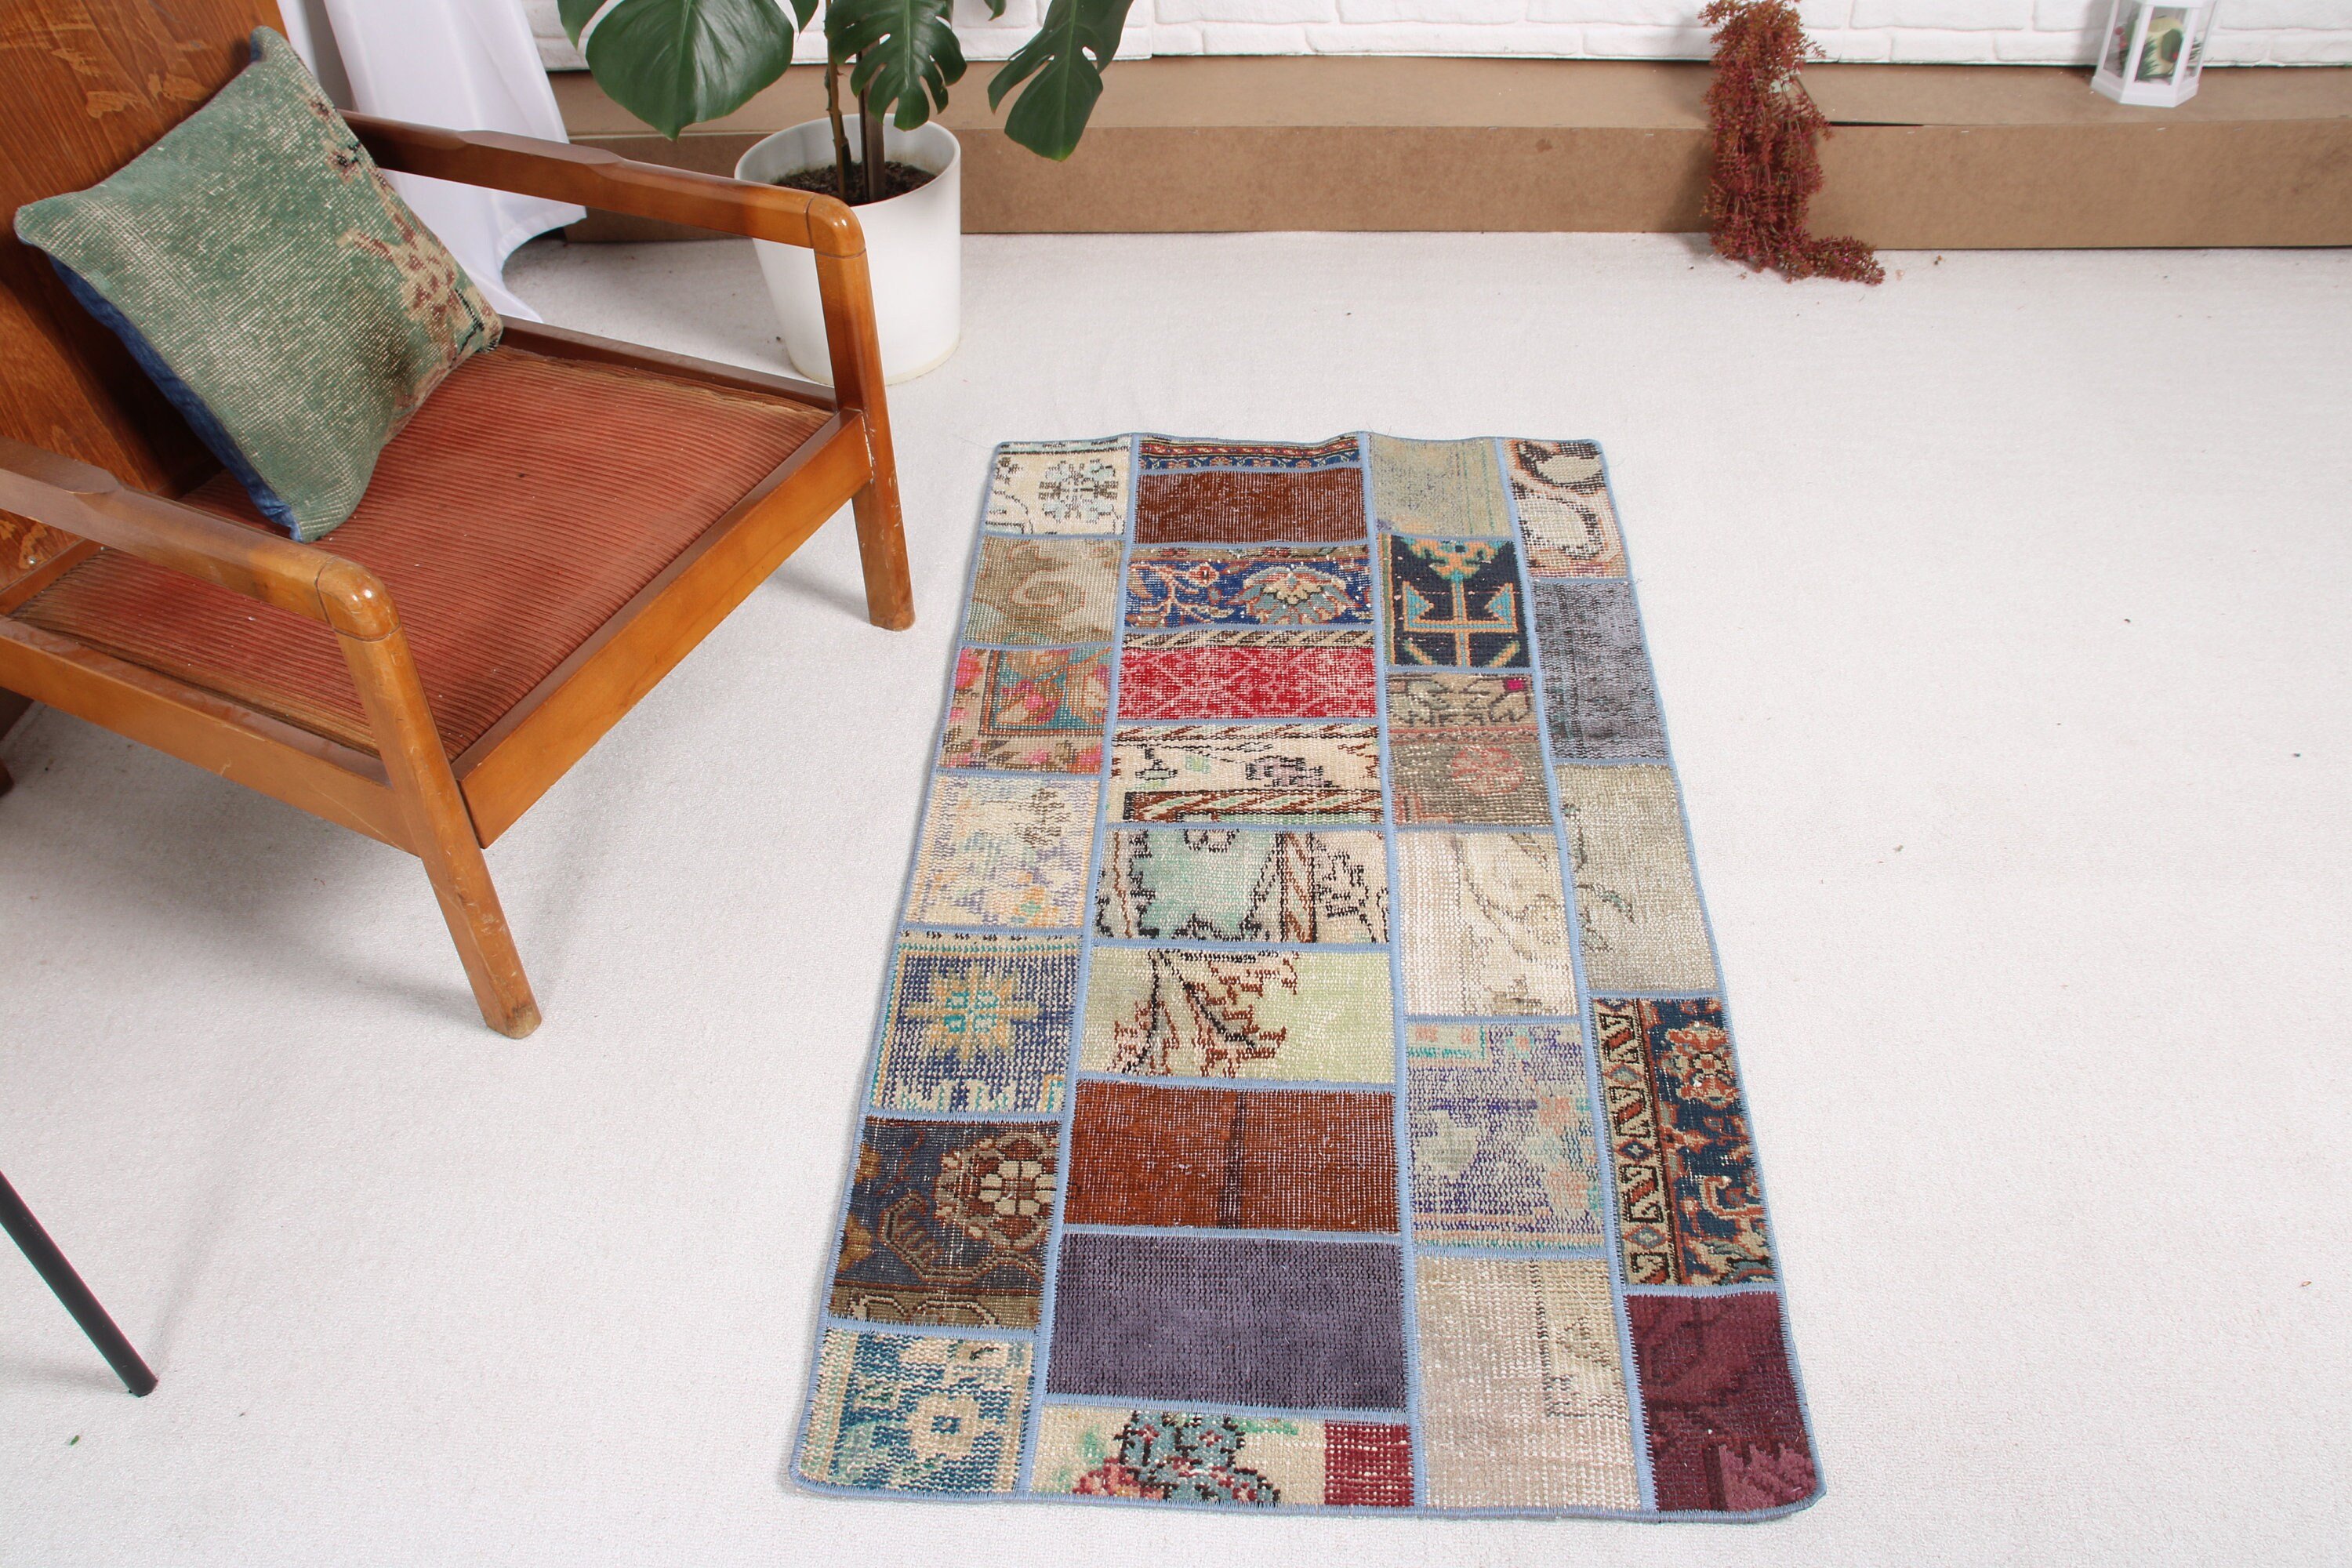 Green  2.4x4.5 ft Small Rug, Vintage Rug, Bath Rugs, Moroccan Rugs, Antique Rug, Entry Rug, Turkish Rugs, Rugs for Bath